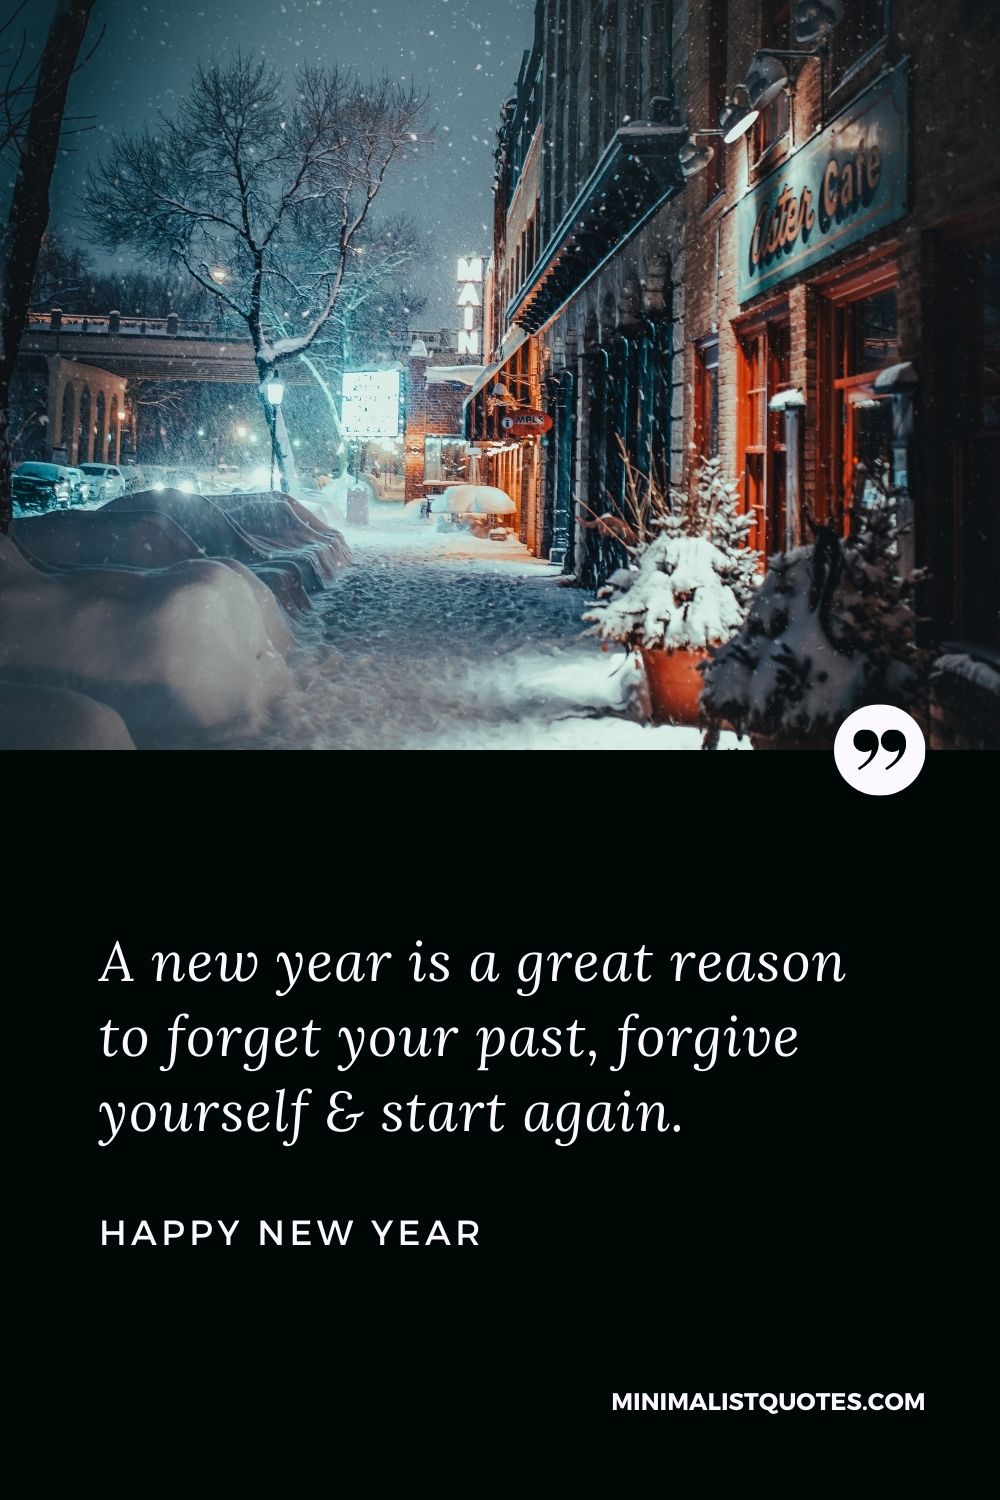 New Year Wish - A new year is a great reason to forget your past, forgive yourself & start again.